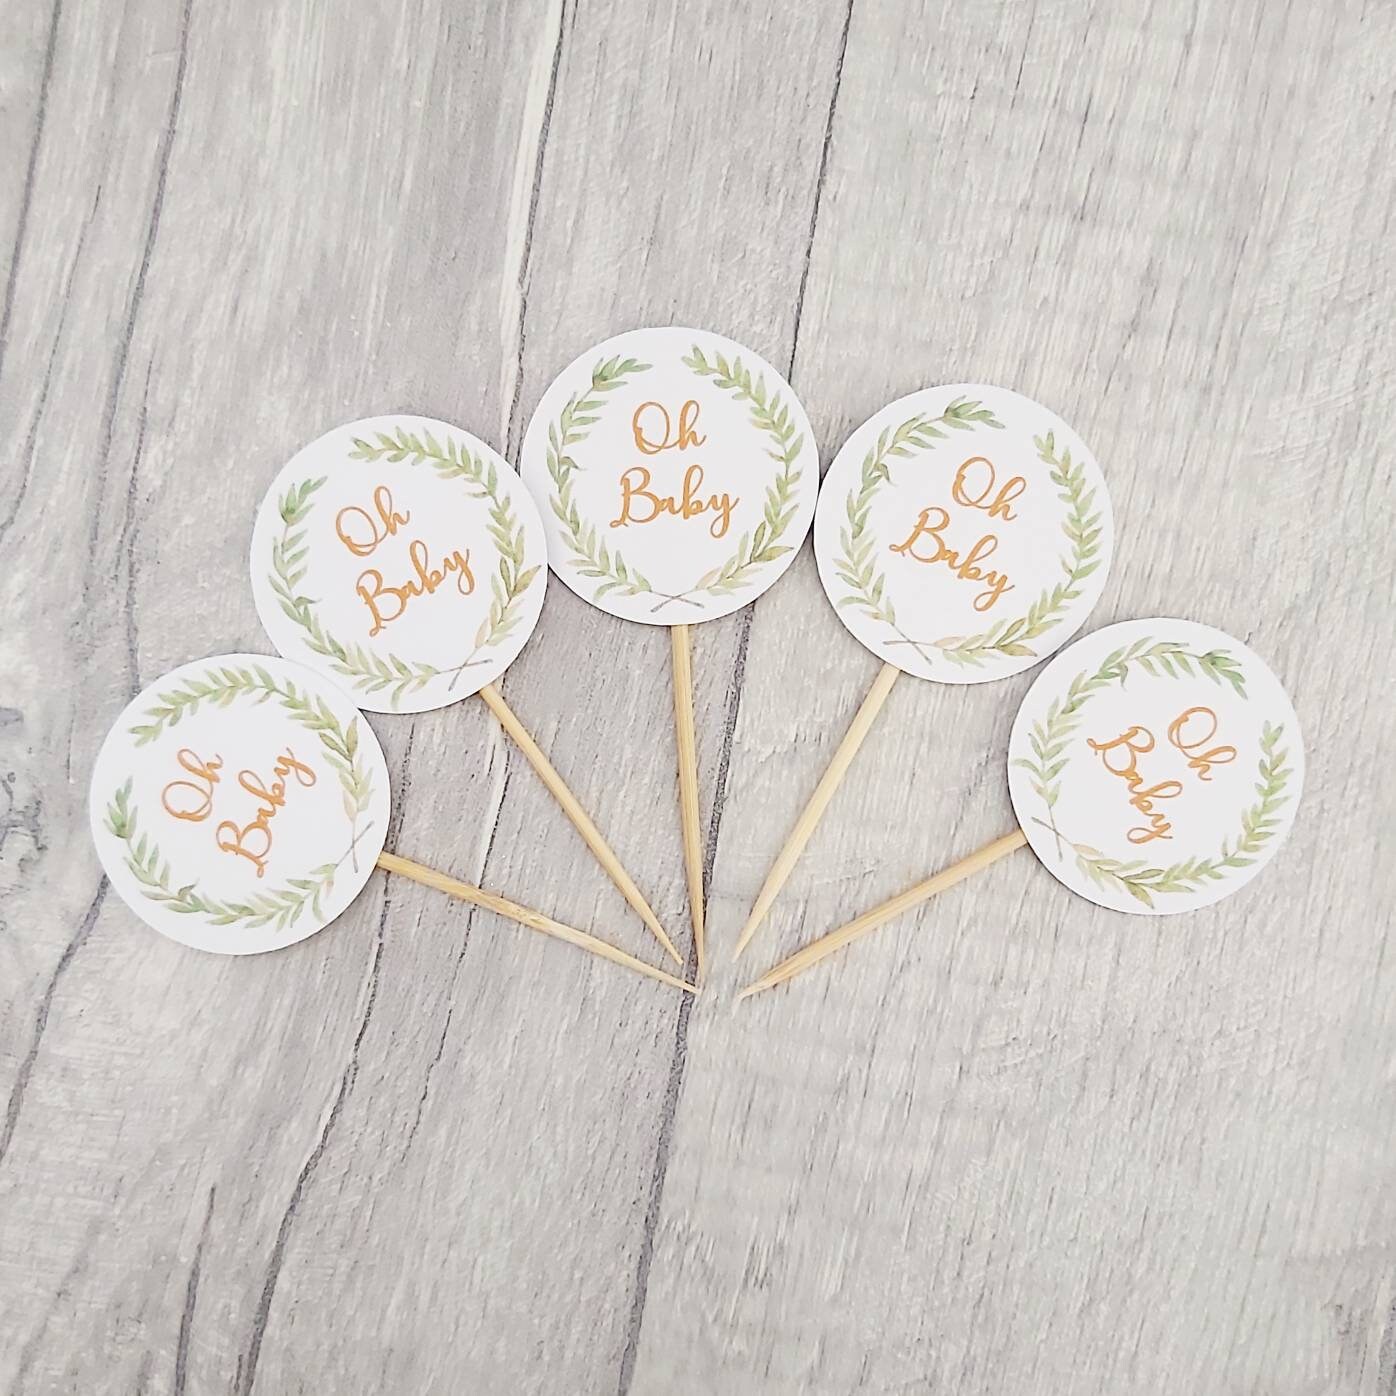 Oh Baby Cake Topper Oh Baby Cupcake Toppers Cupcake Toppers Etsy